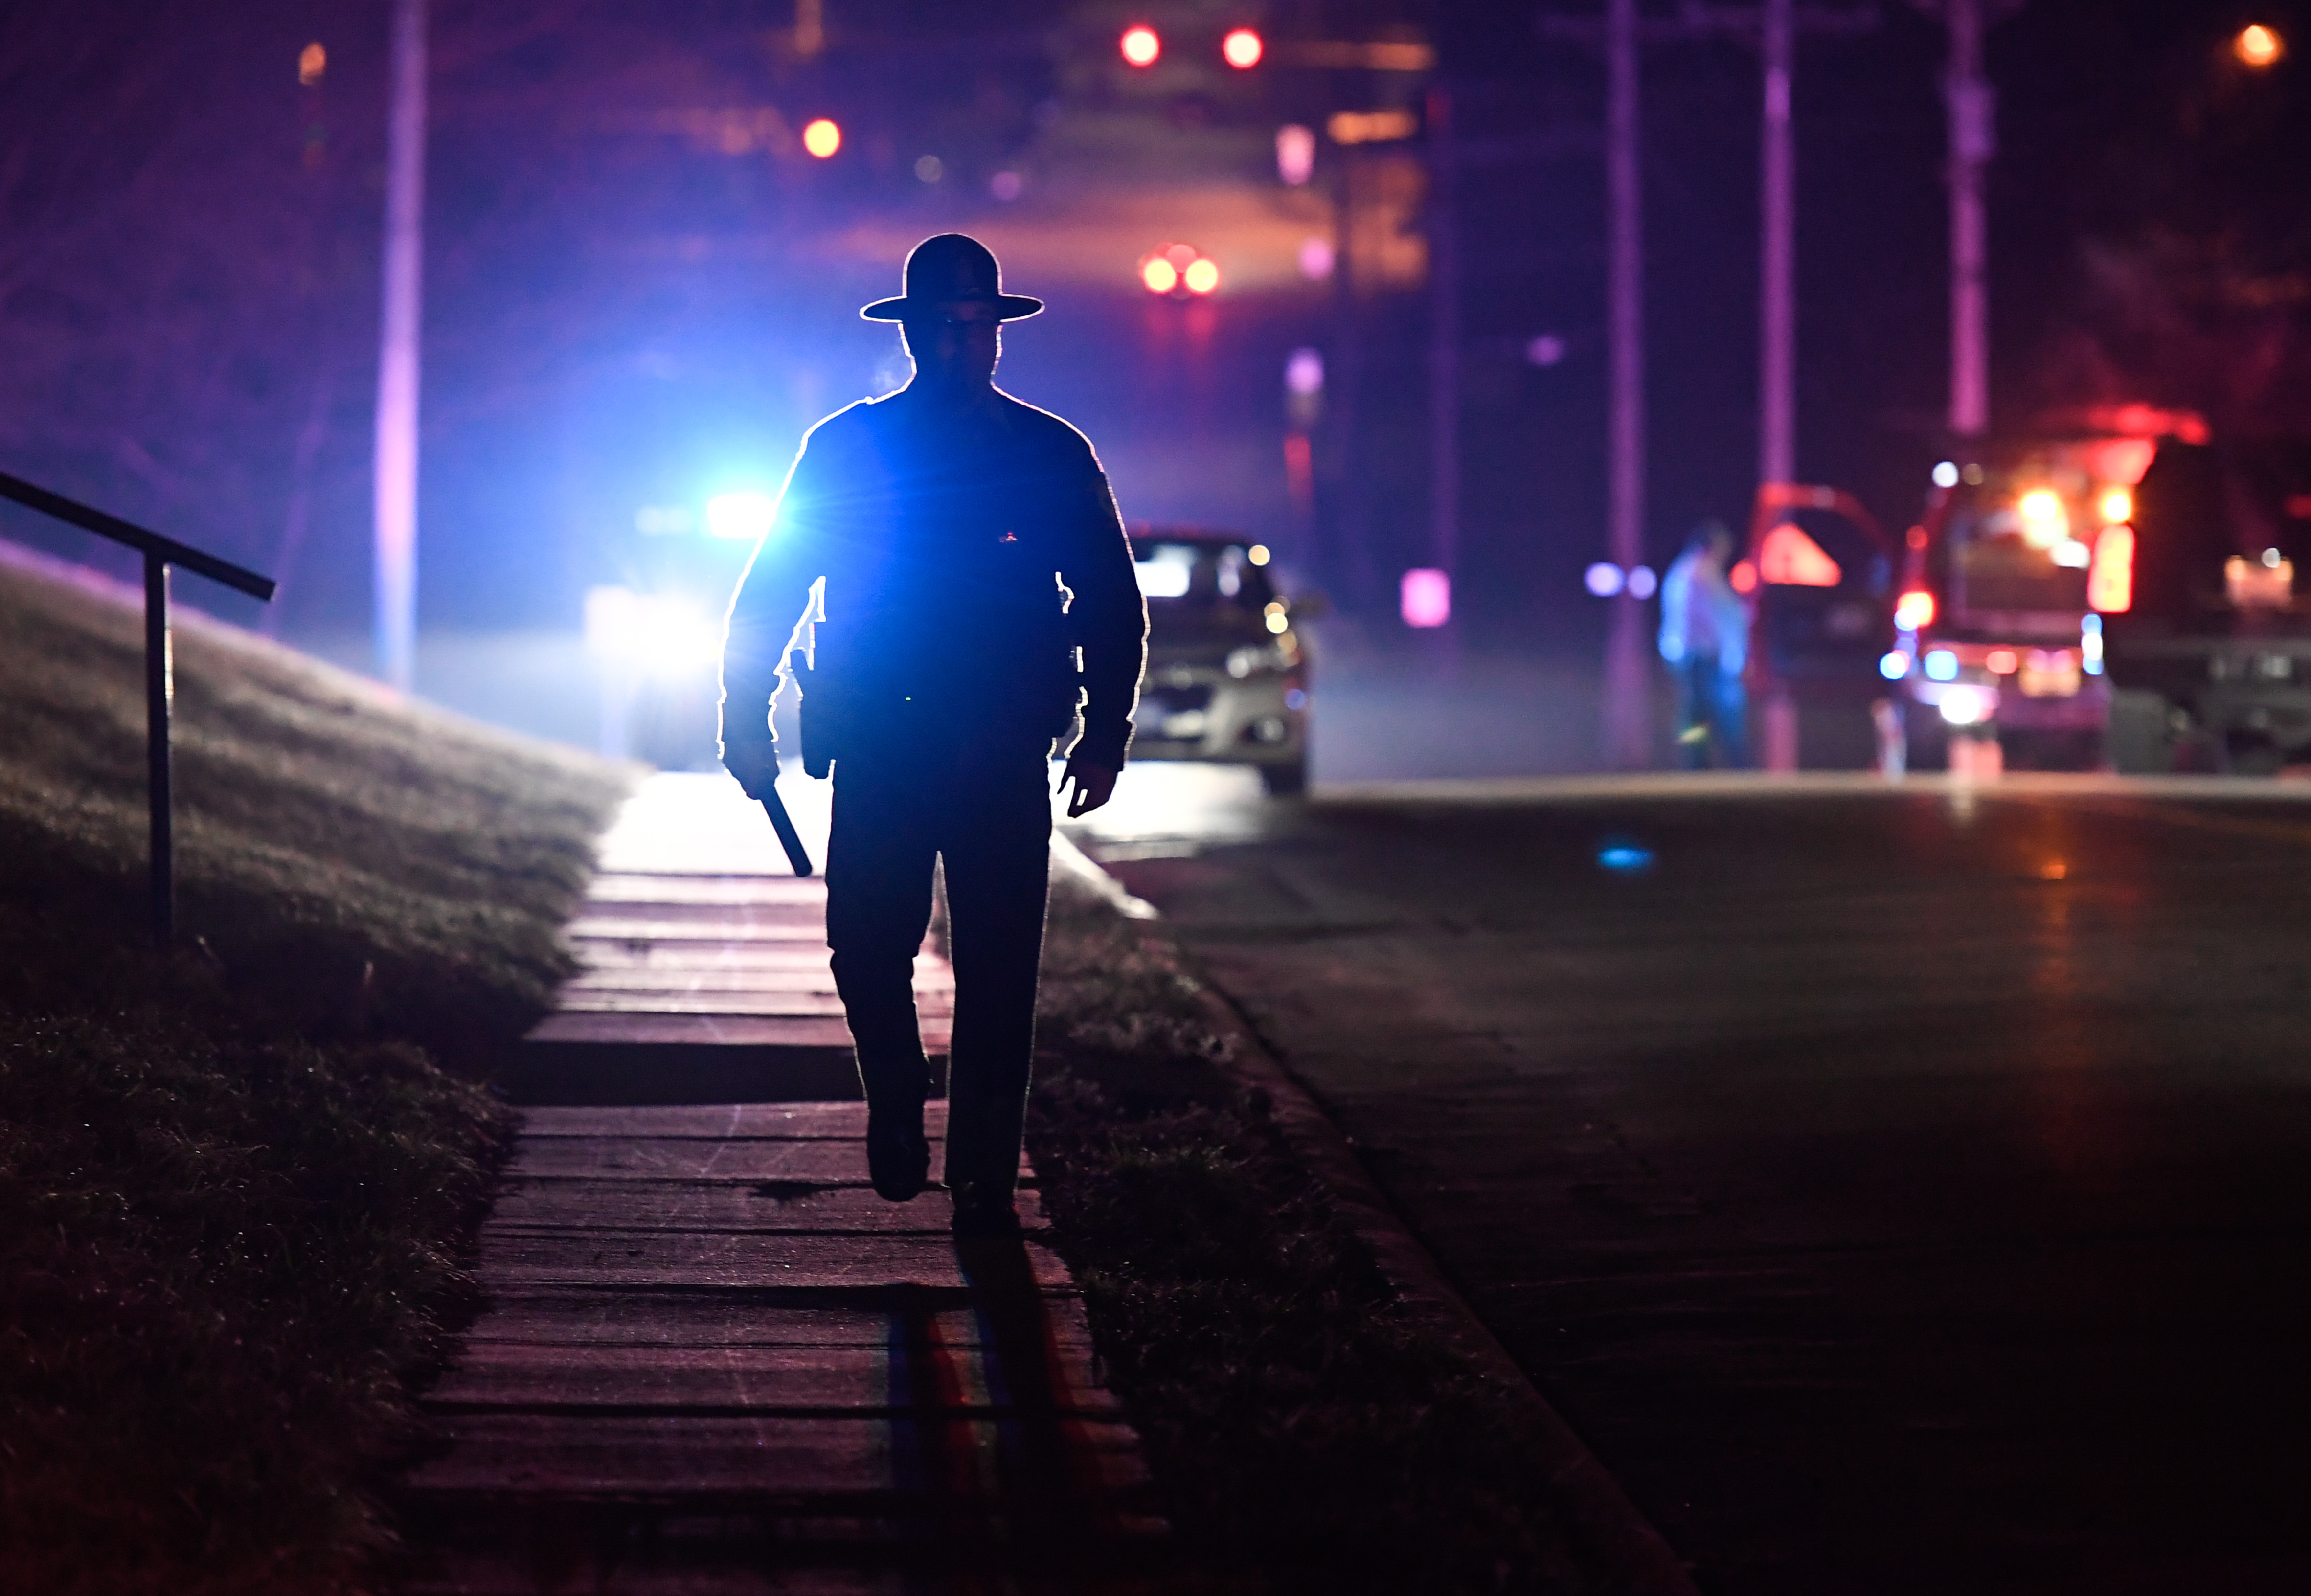 An Illinois State Trooper is silhouetted against the emergency lights while walking up 1st Street, in Coal Valley, near the scene of a reported shooting Wednesday March 11, 2020.